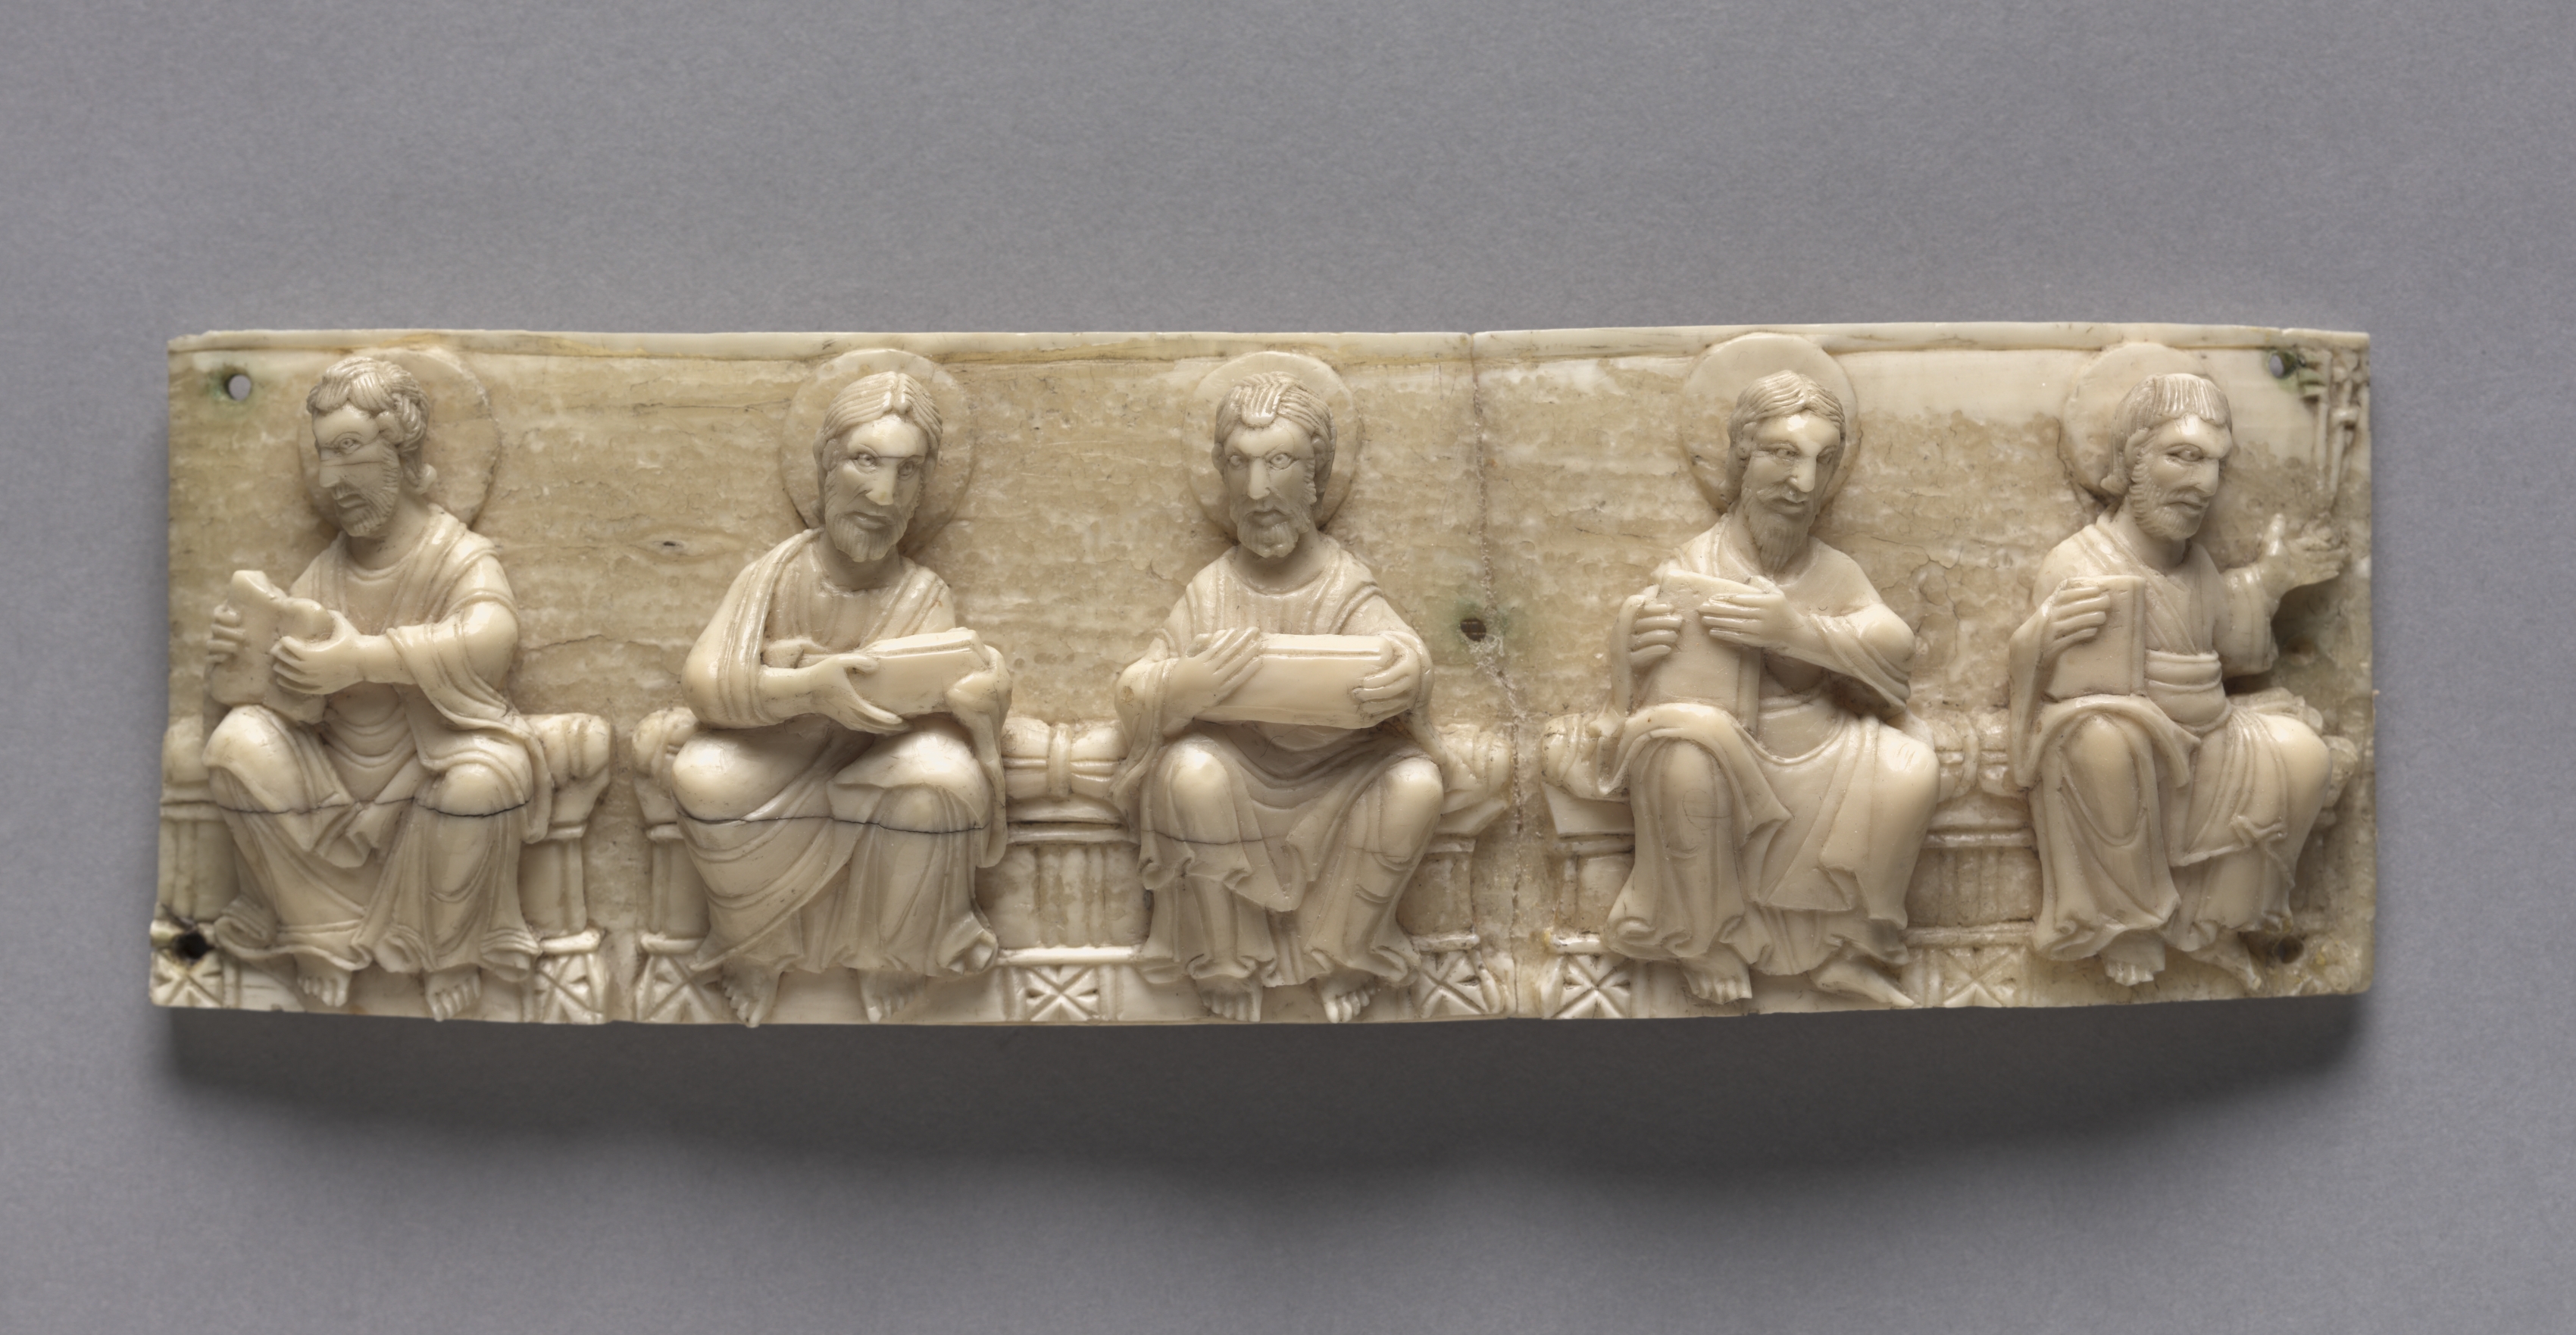 Plaque from a Portable Altar Showing Christ and the Apostles